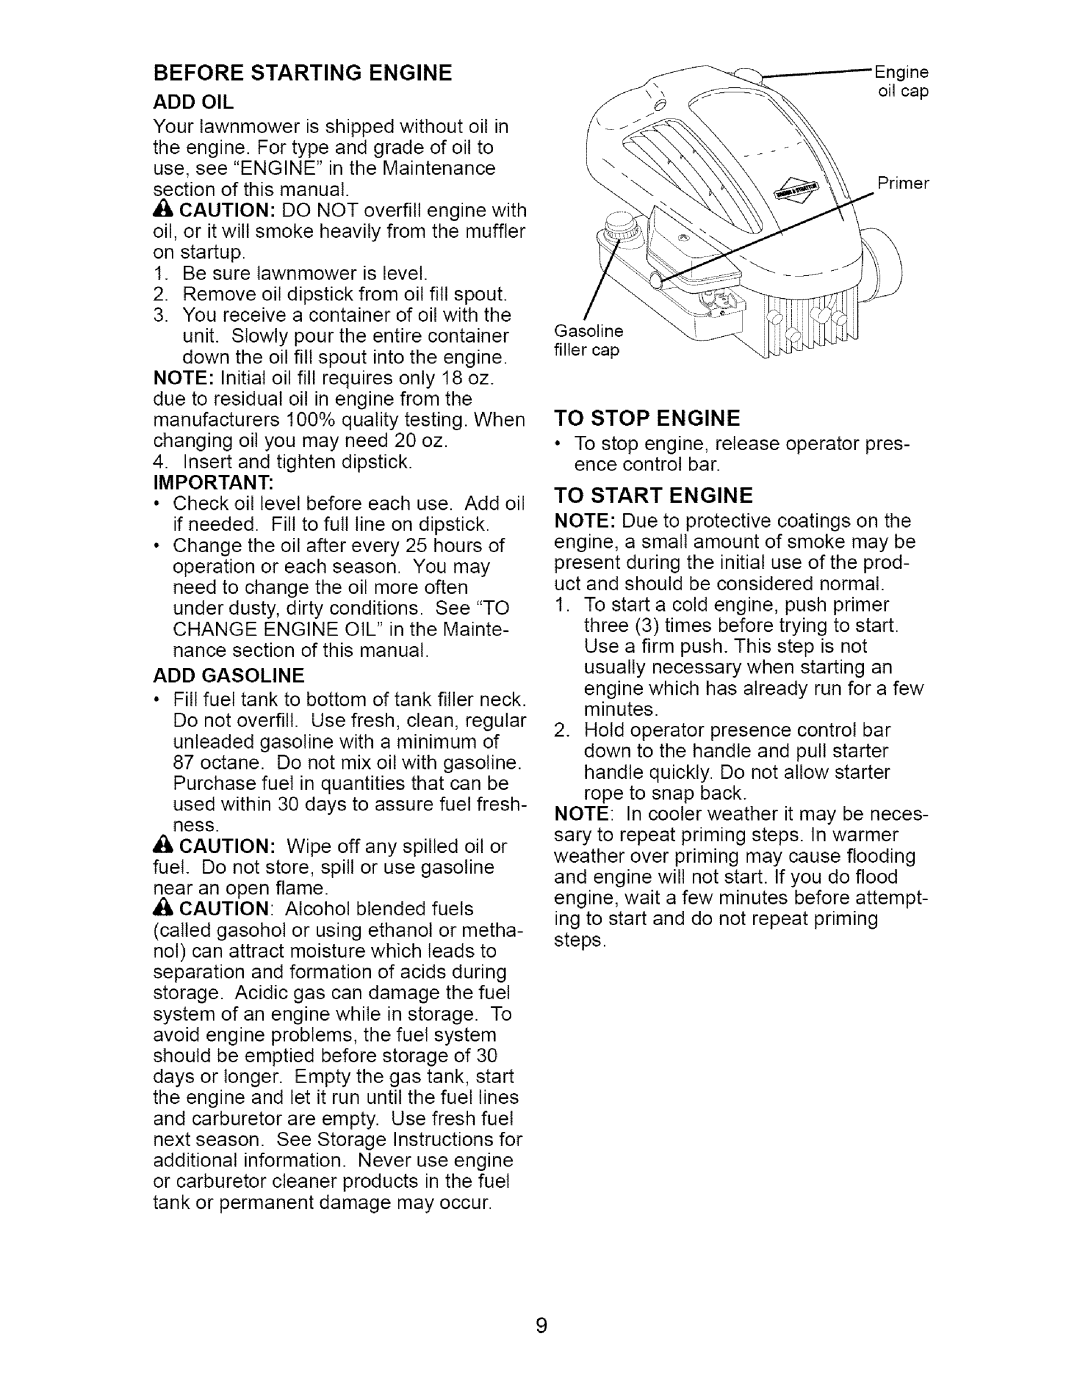 Craftsman 917.38514 owner manual Before Starting Engine, Add Oil, To Stop Engine, To Start Engine 